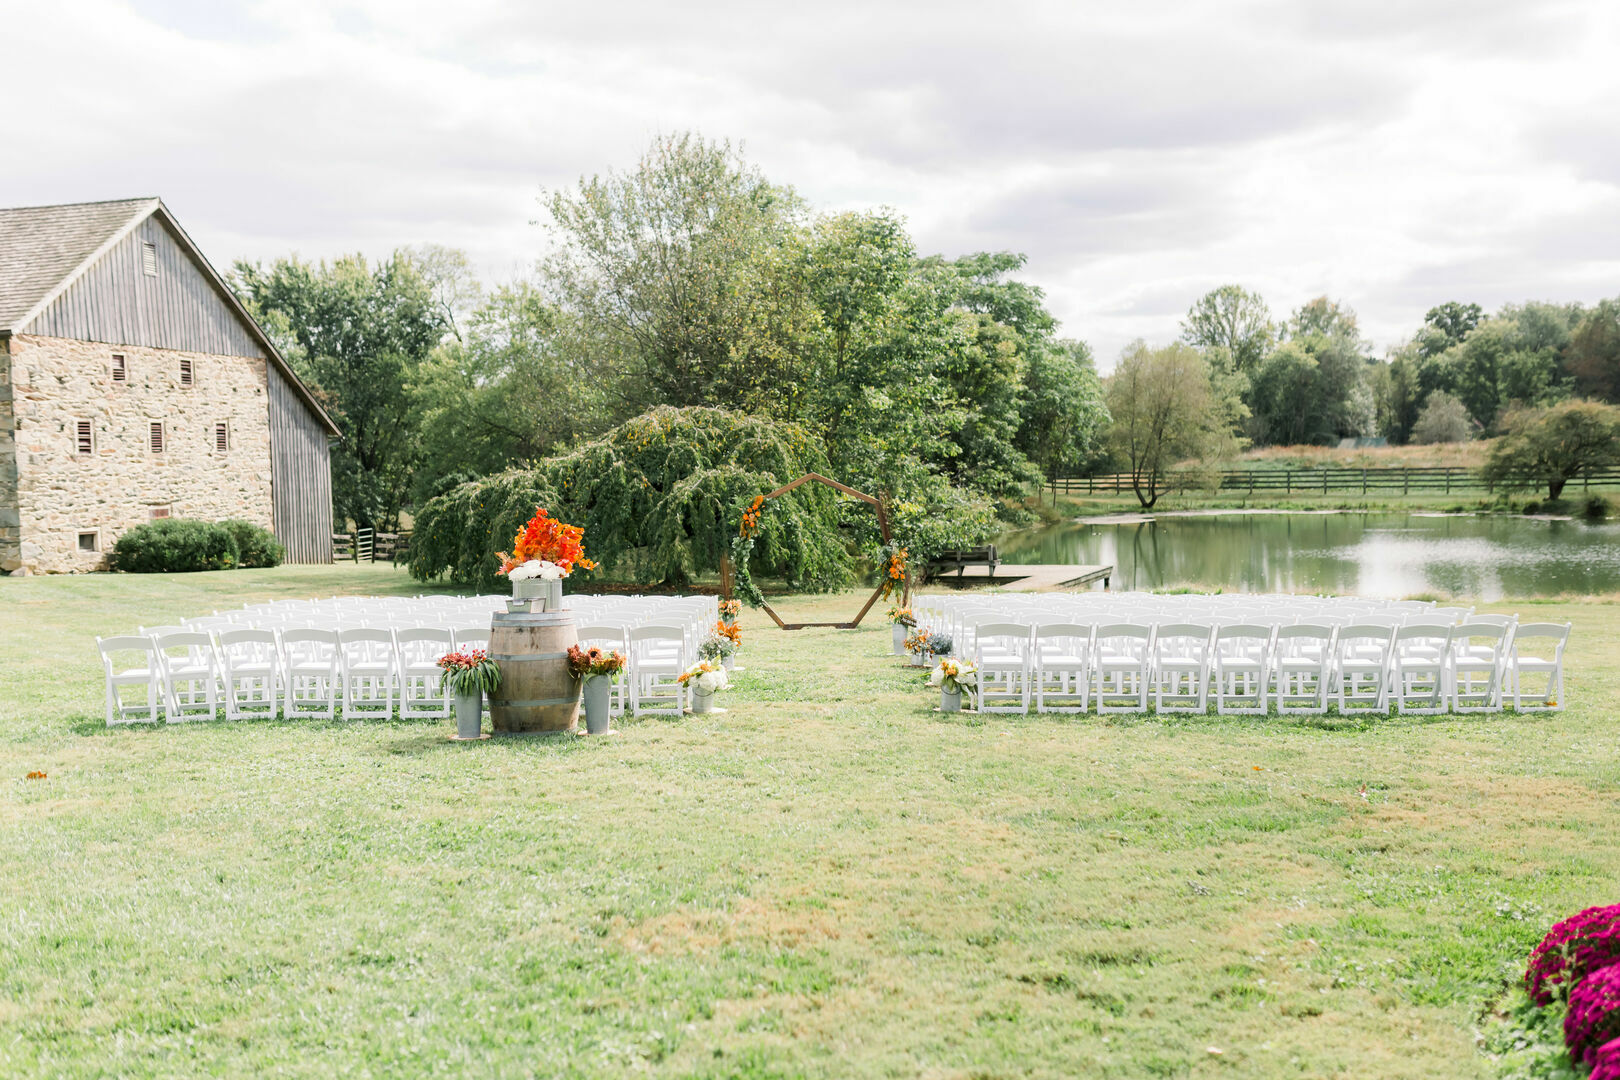 Sylvanside Farm Weddings and Events Open House, Purcellville, Virginia, United States